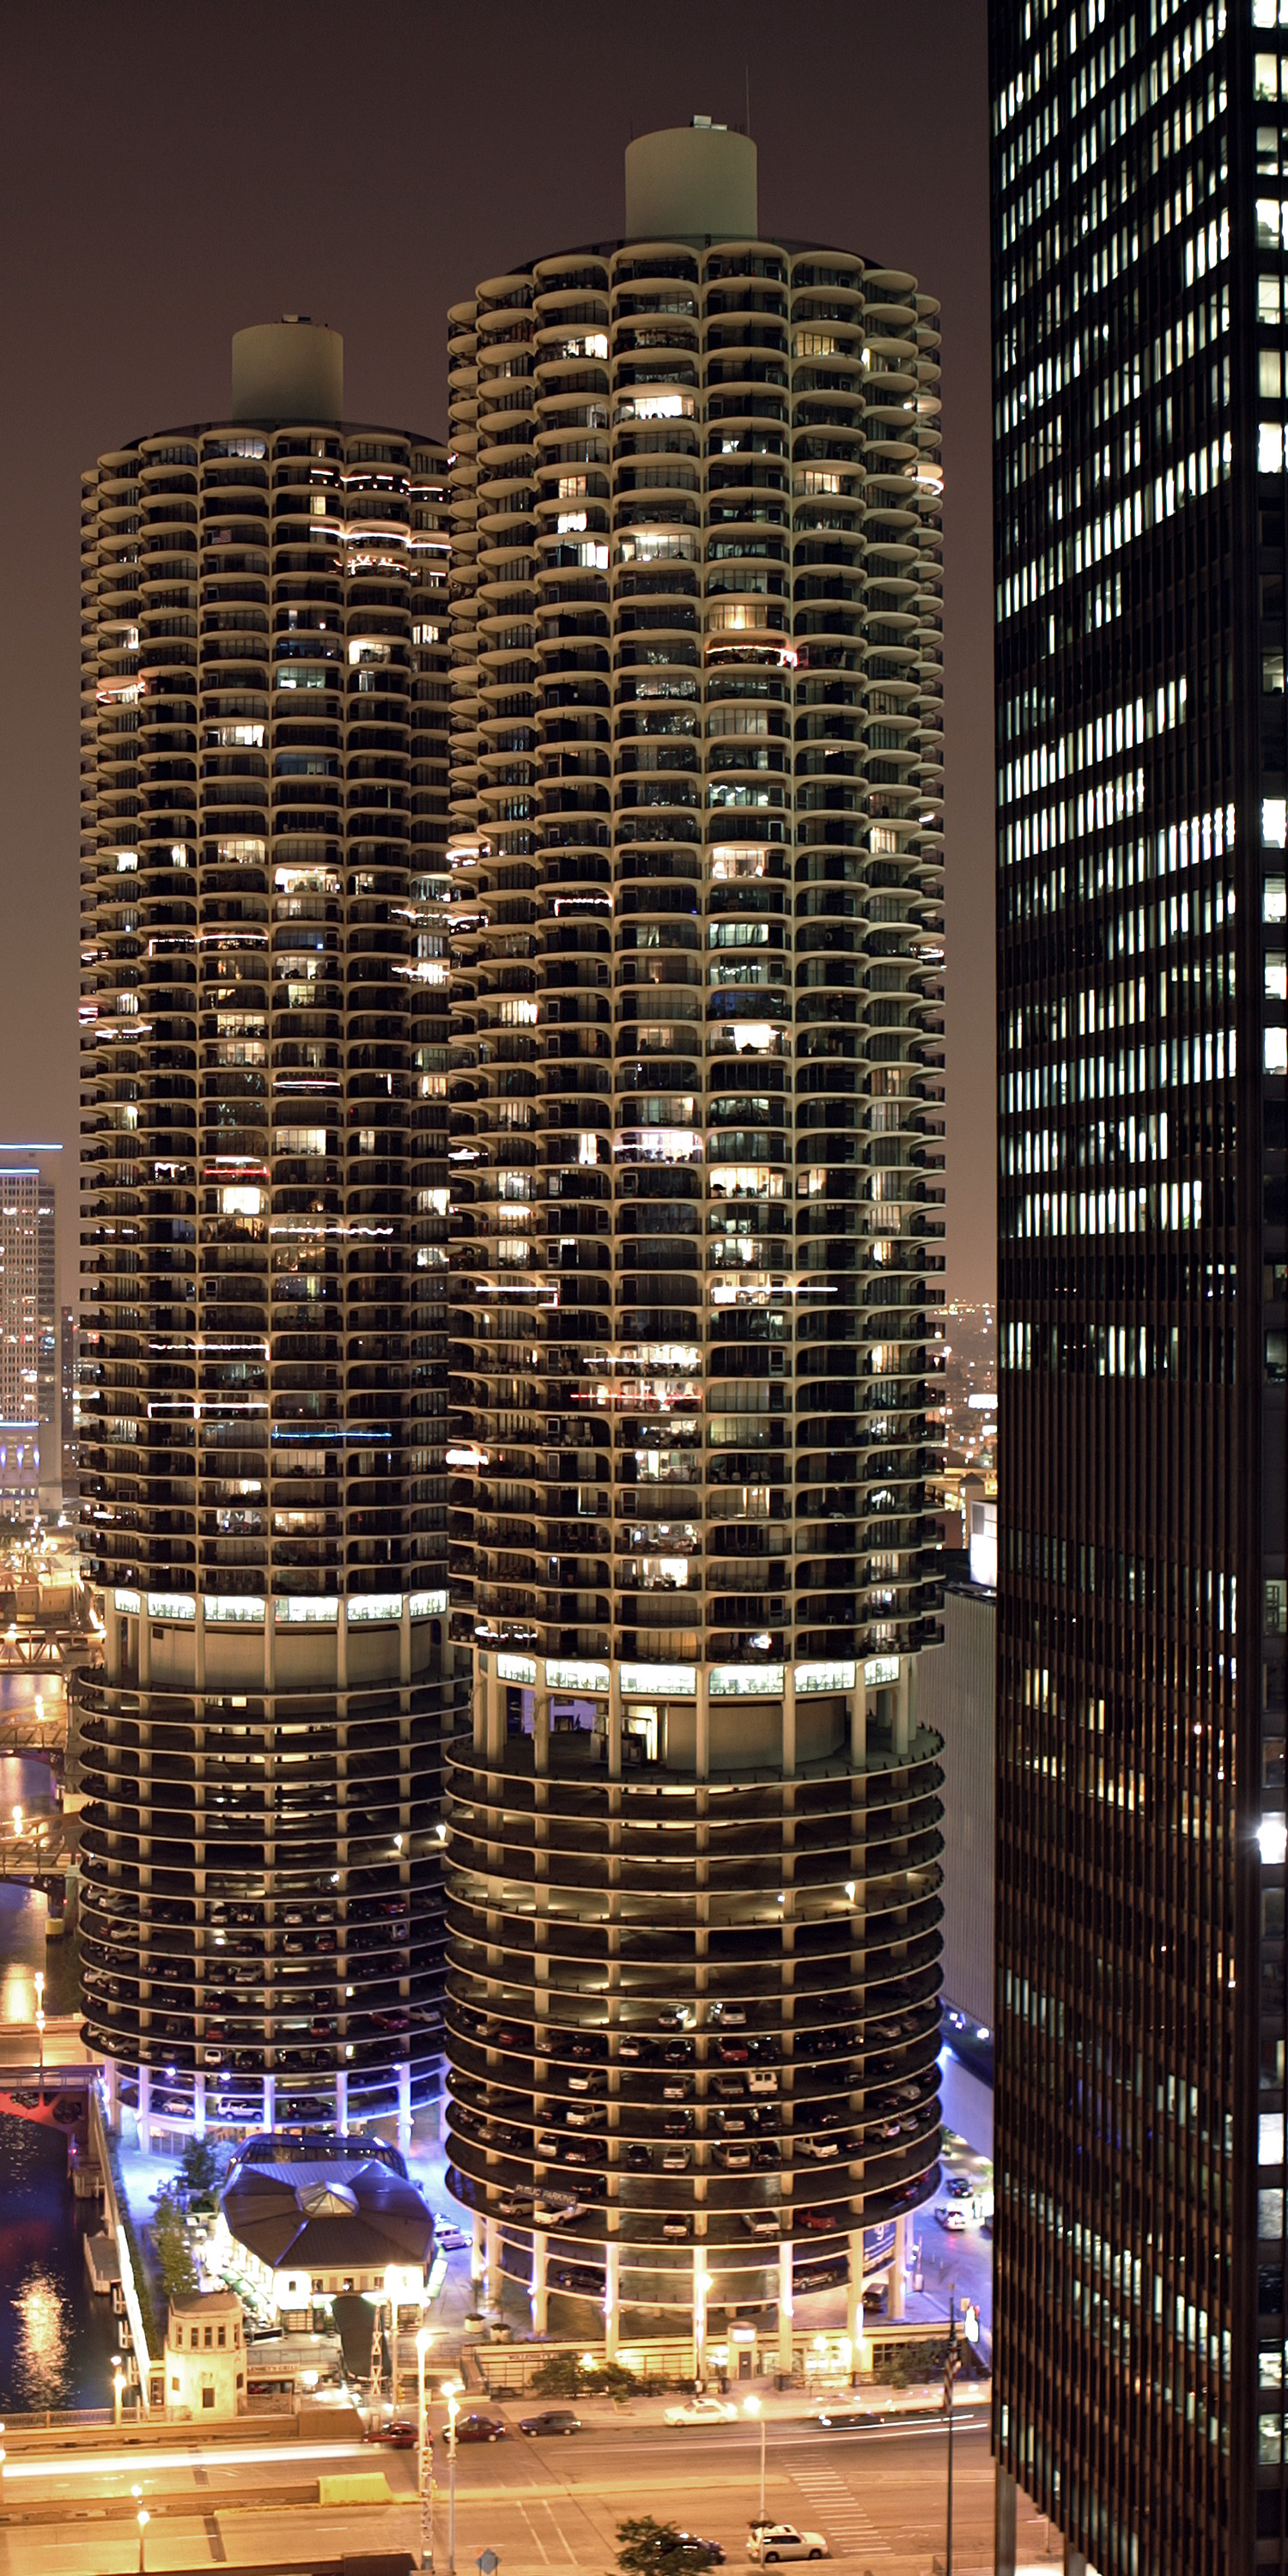 Marina City I, Chicago - Night view from Mather Tower. © Mathias Beinling